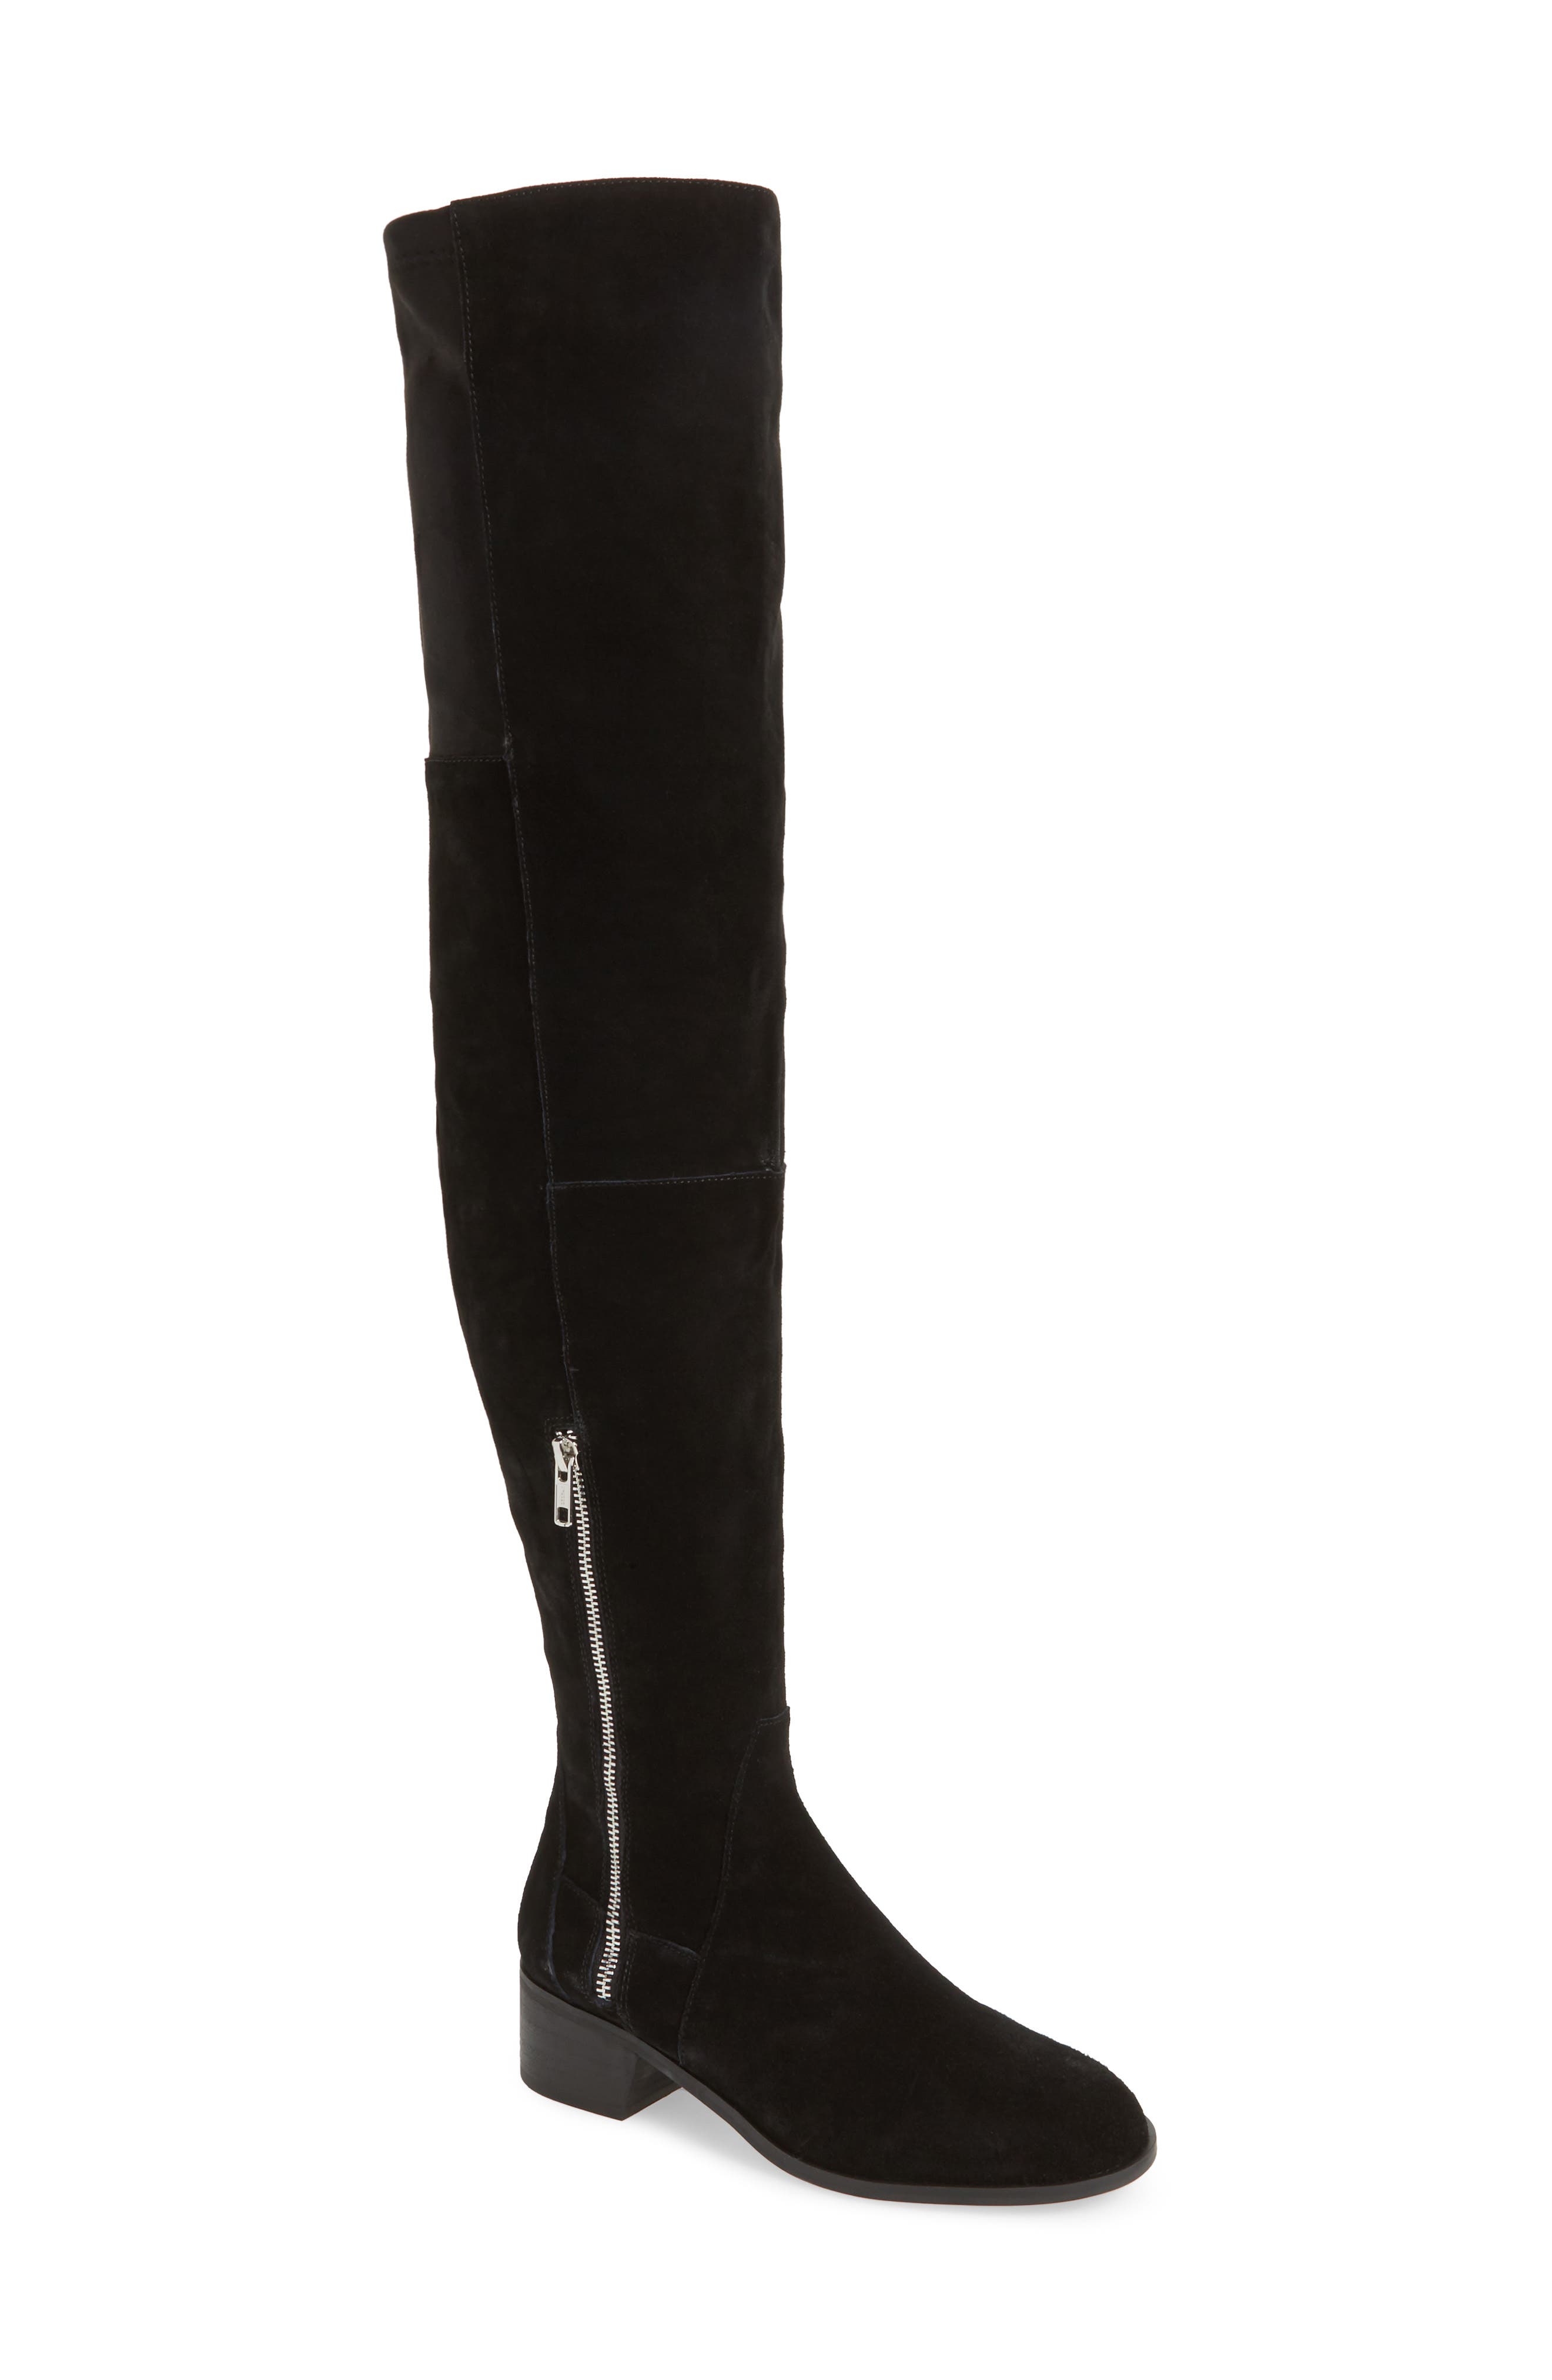 Free People | Everly Thigh High Boot 